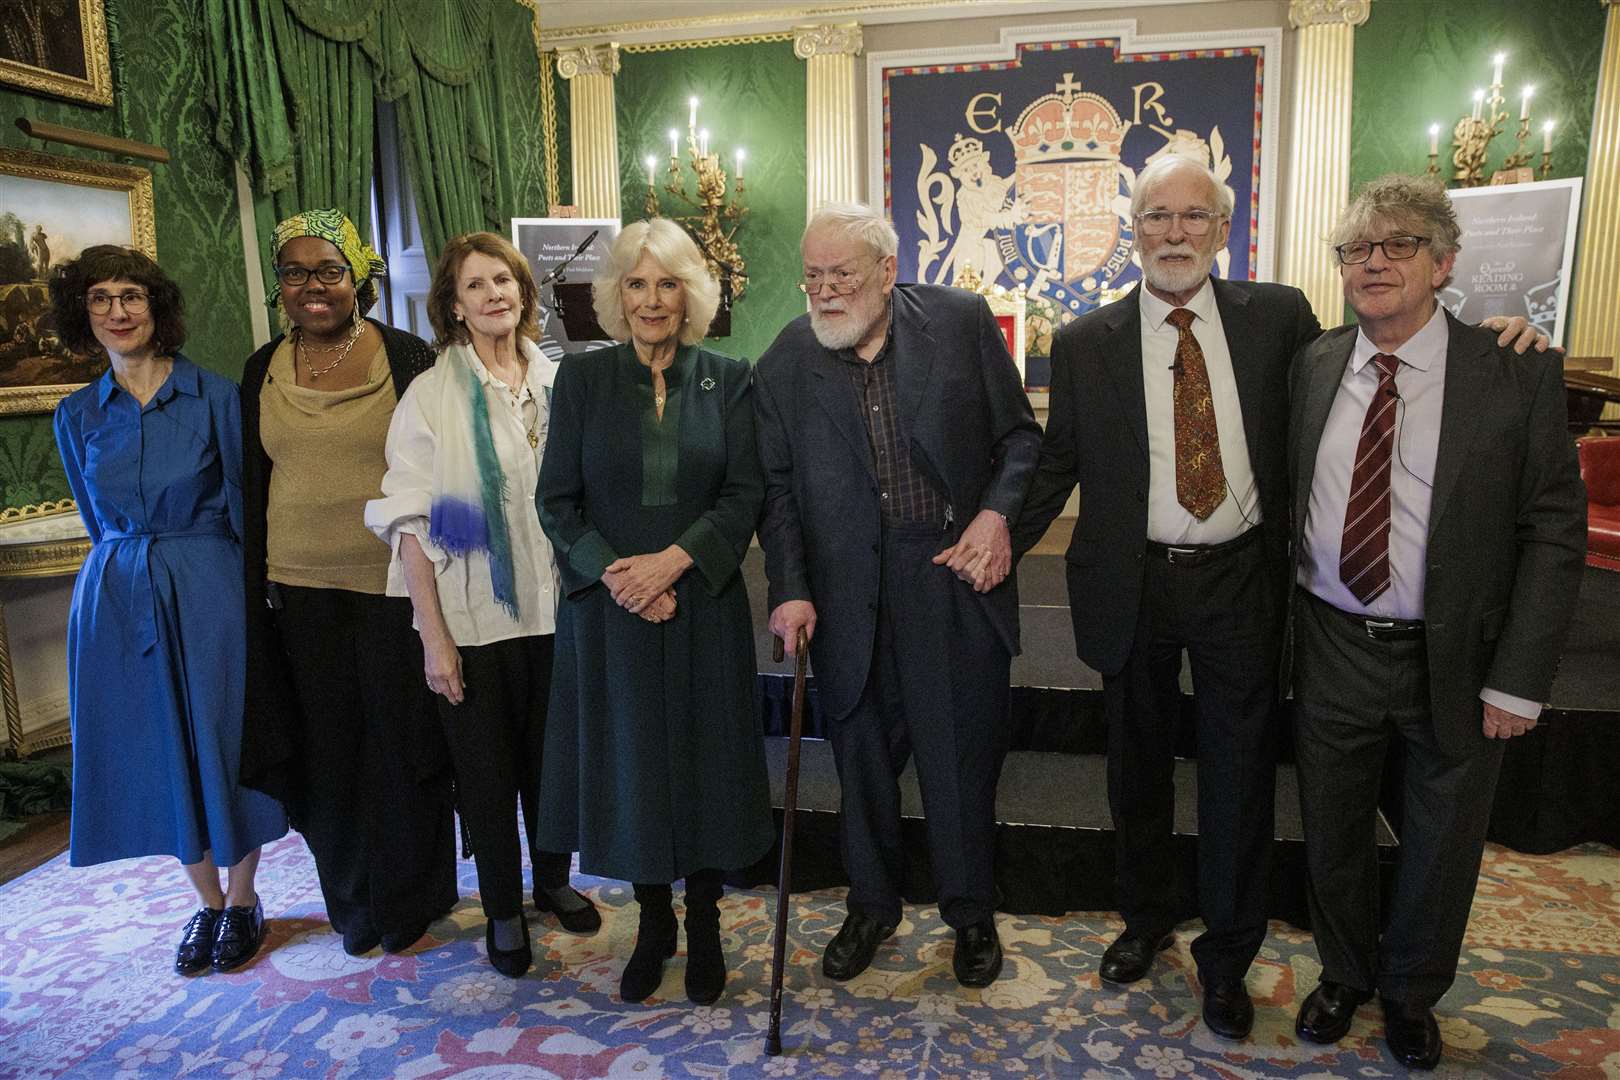 Camilla with (left to right) poet Sinead Morrissey, Jamaican poet Raquel McKee, actor Frances Tomelty, contemporary poet Micheal Longley, actor Ian McElhinney and poet Paul Muldoon (Liam McBurney/PA)